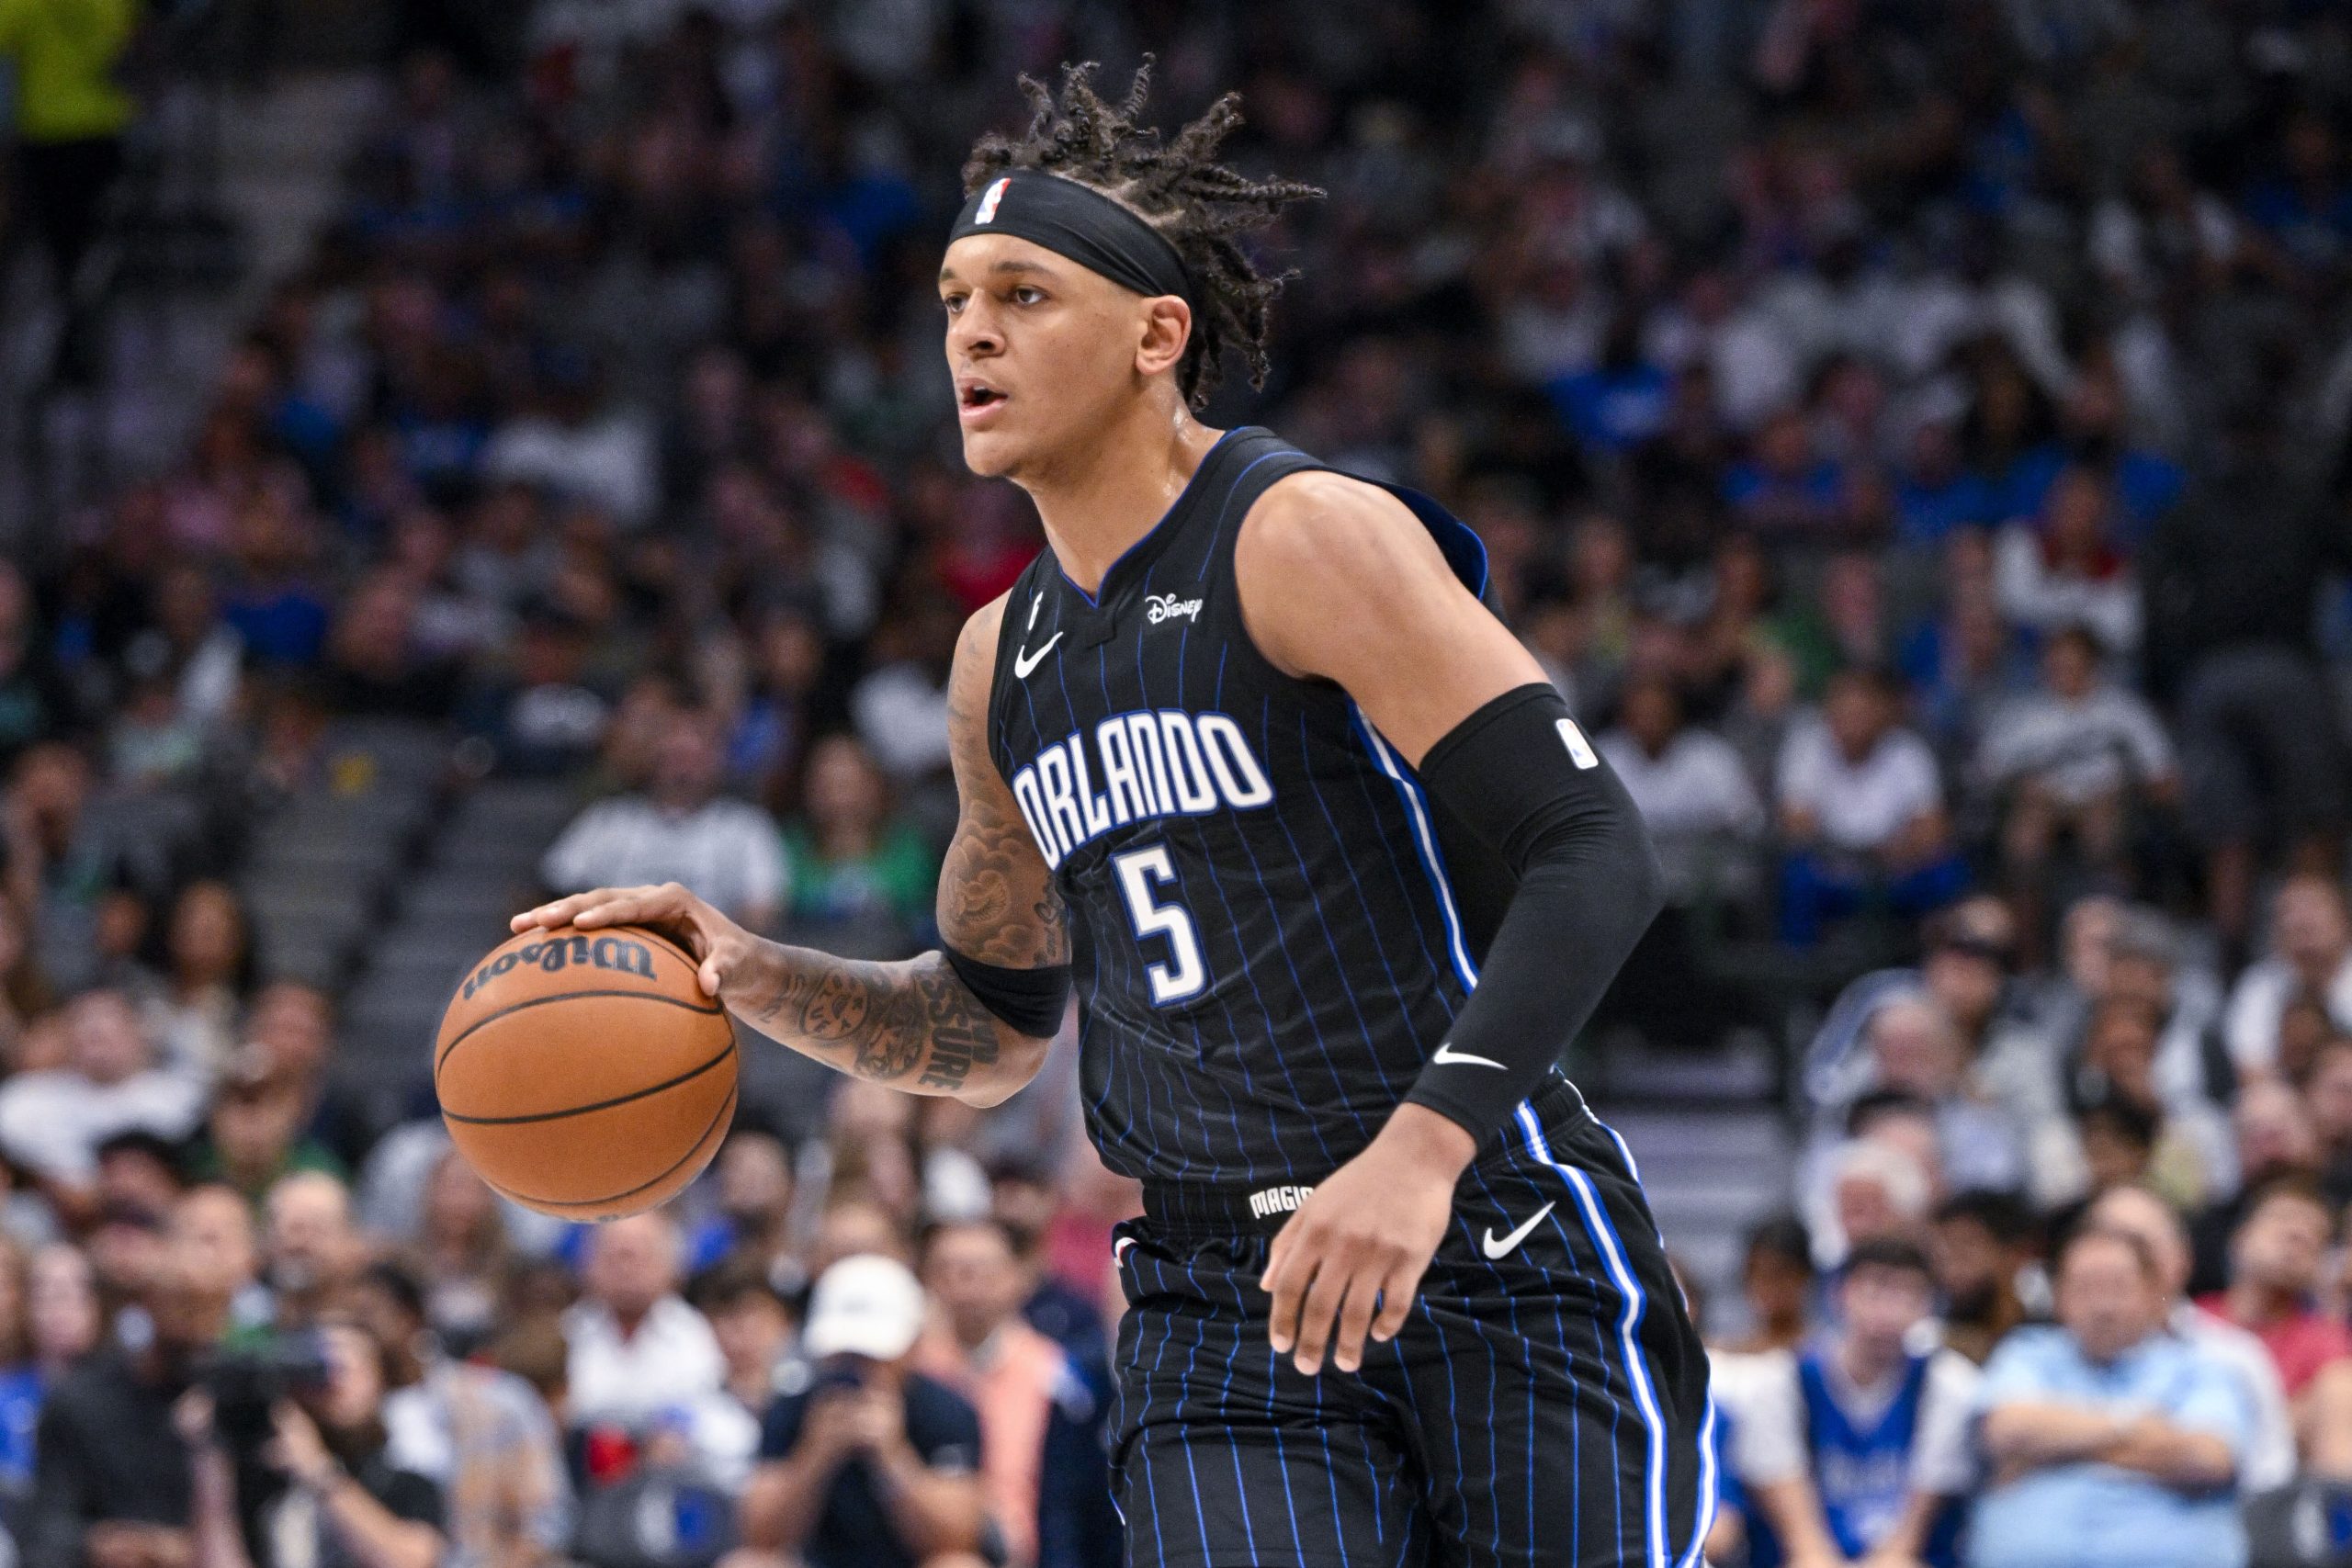 NBA Futures 2022-23: Best NBA player futures picks and predictions – Banchero looks to live up to expectations